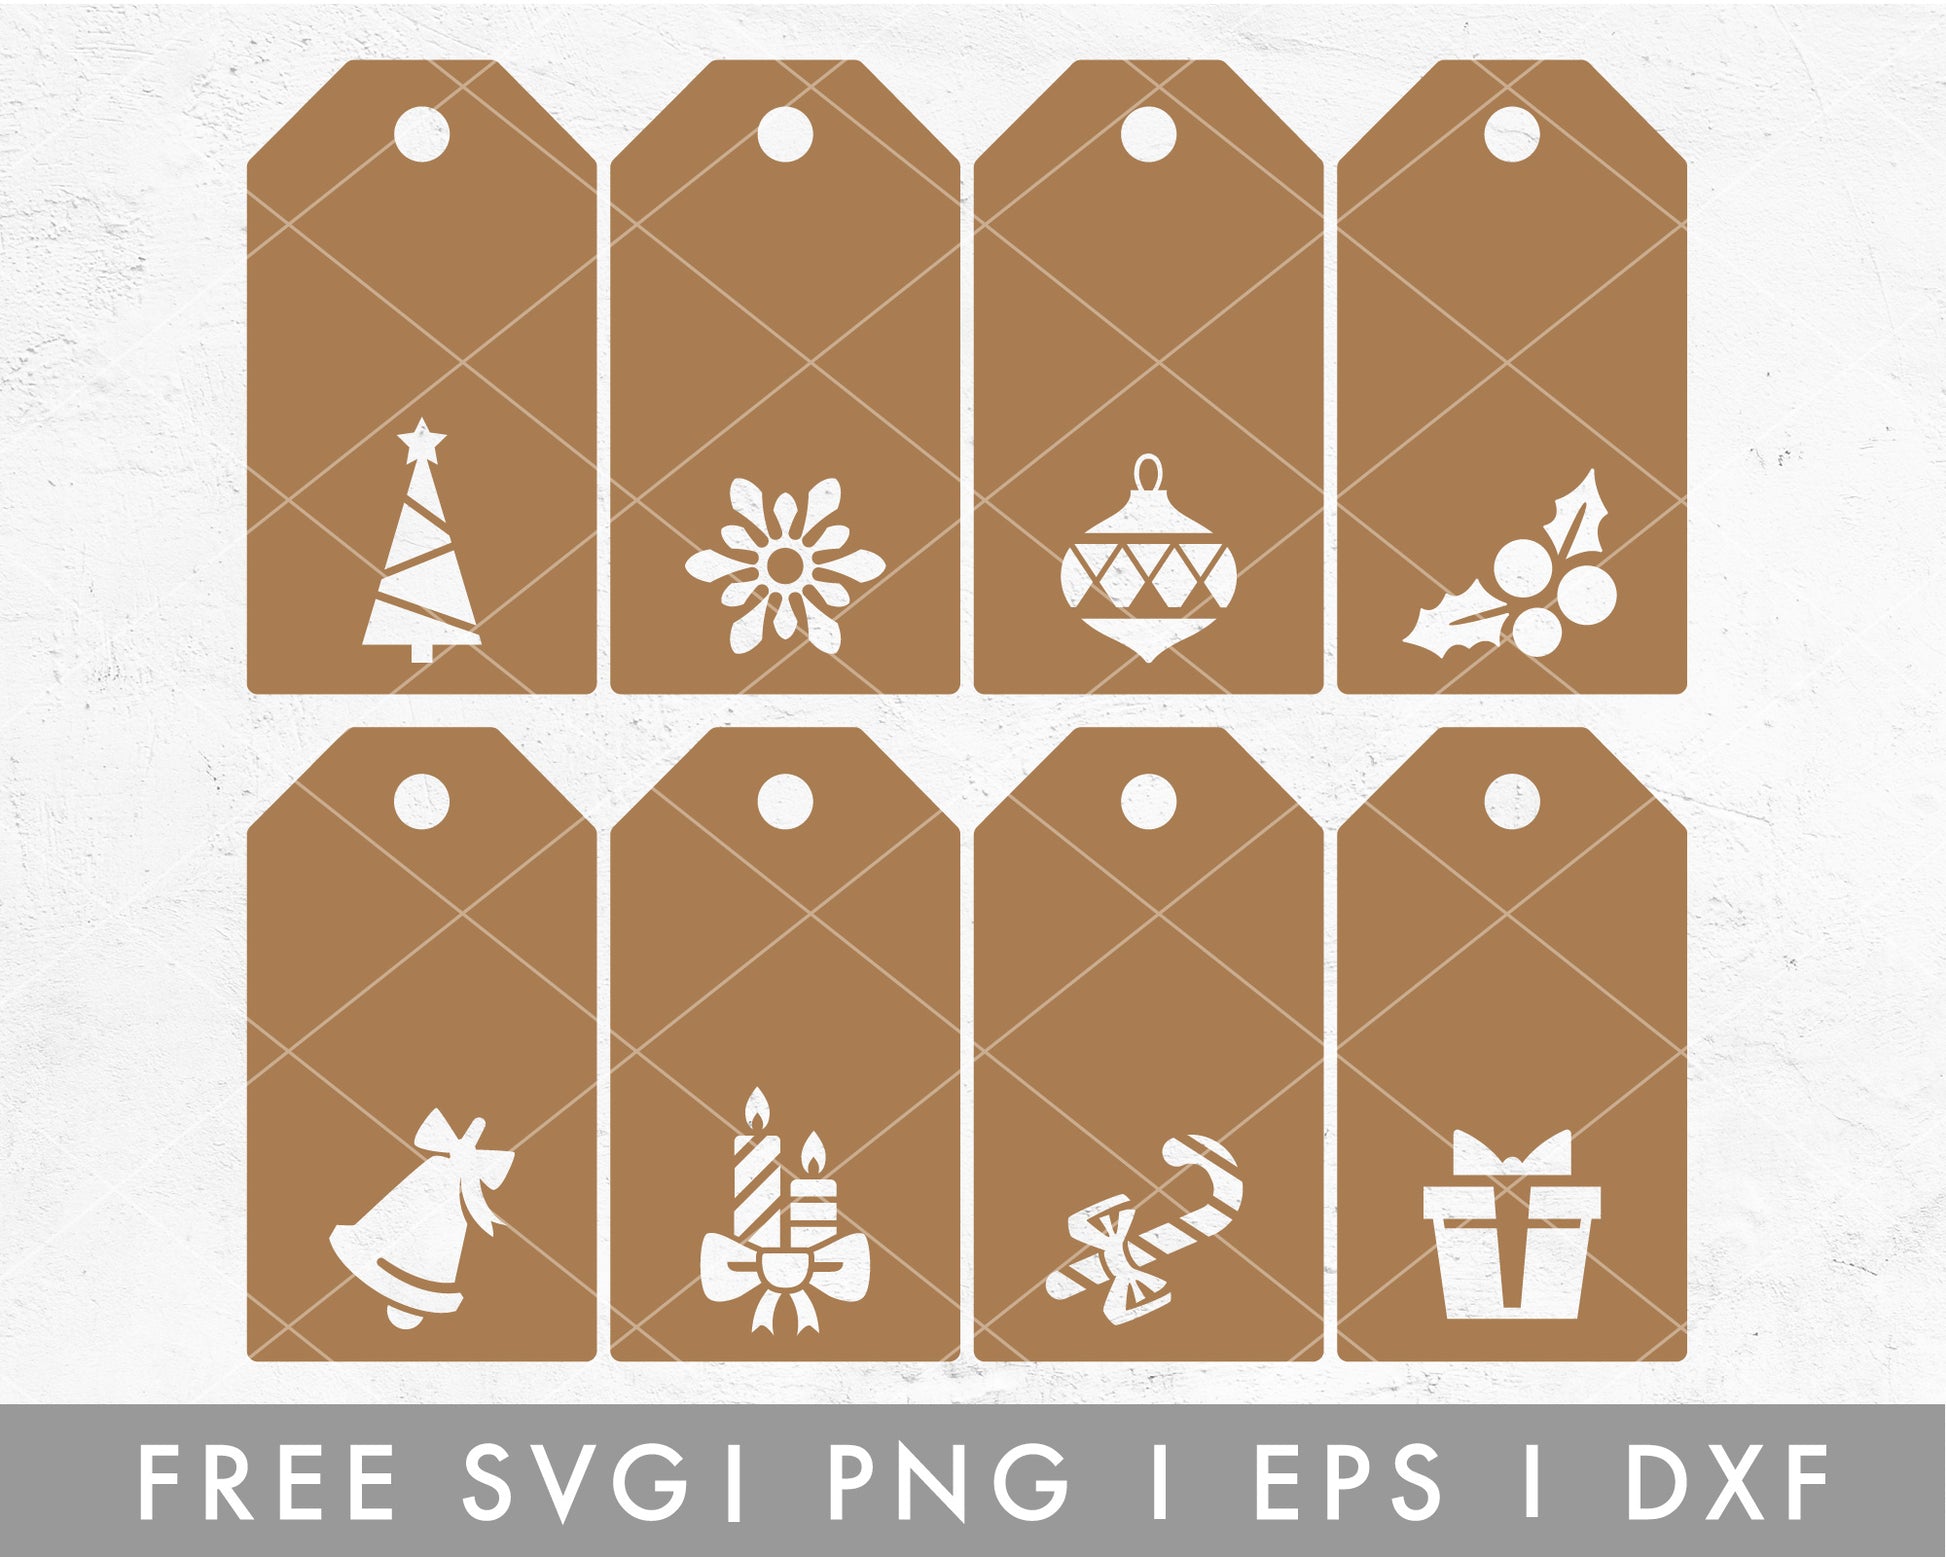 Personalised Christmas Gift Tags Stickers Labels, Snow Globe